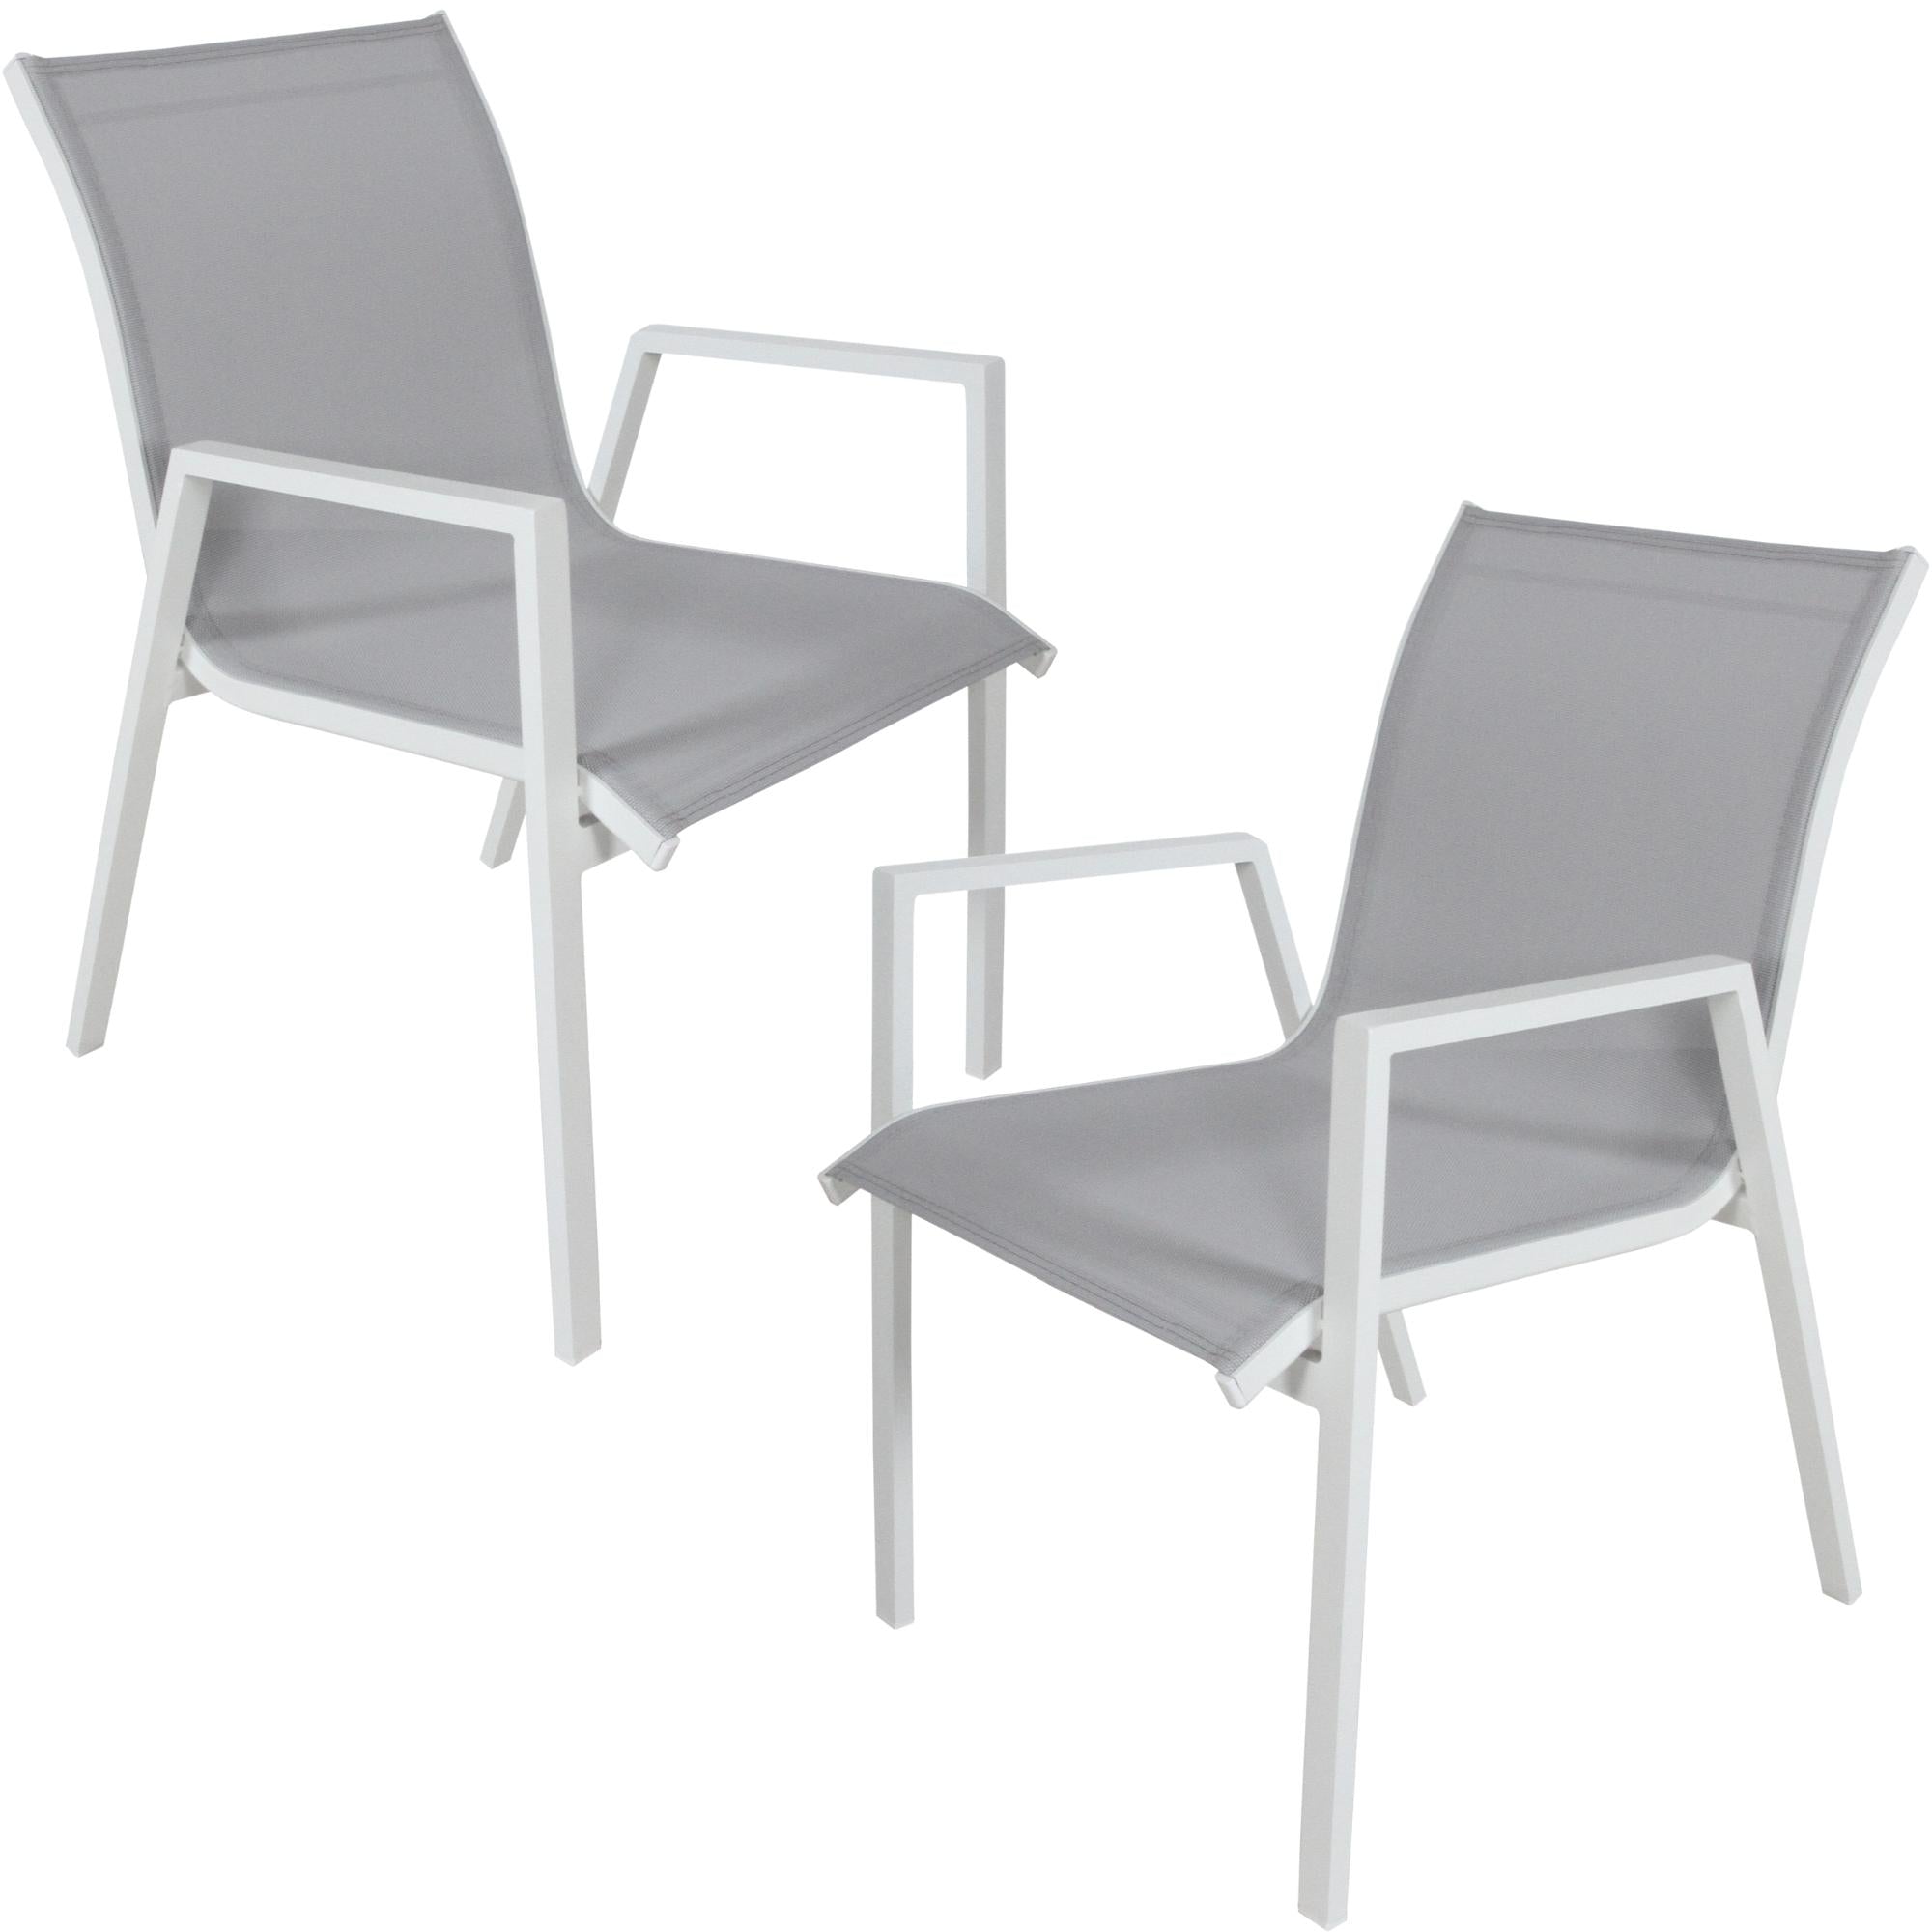 Stackable Aluminium Outdoor Dining Chairs Set (2pc) White